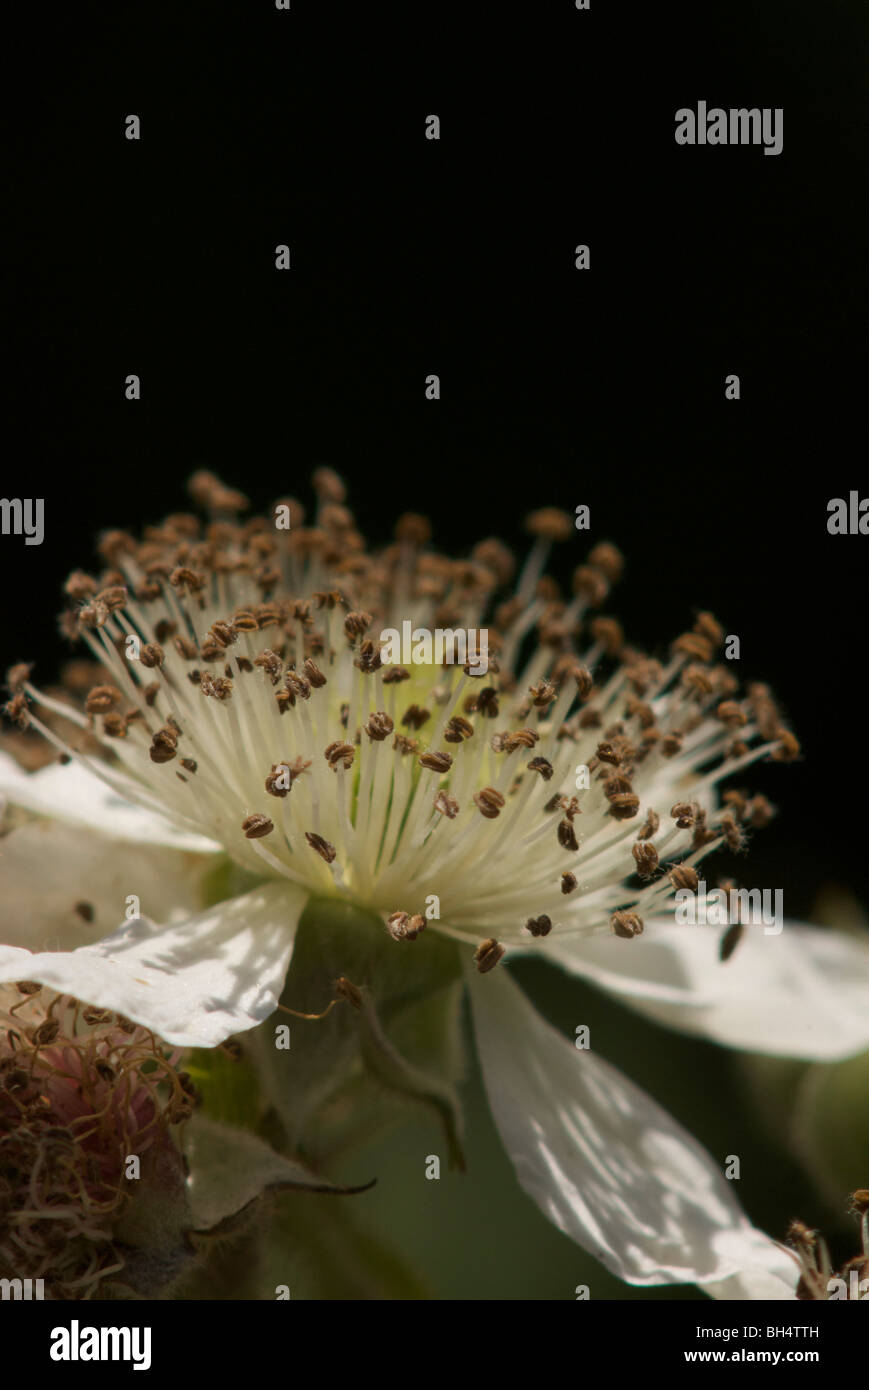 Close-up of a flower of the common blackberry (Rubus fruticosus) with stigma, filaments, anthers and petals. Stock Photo